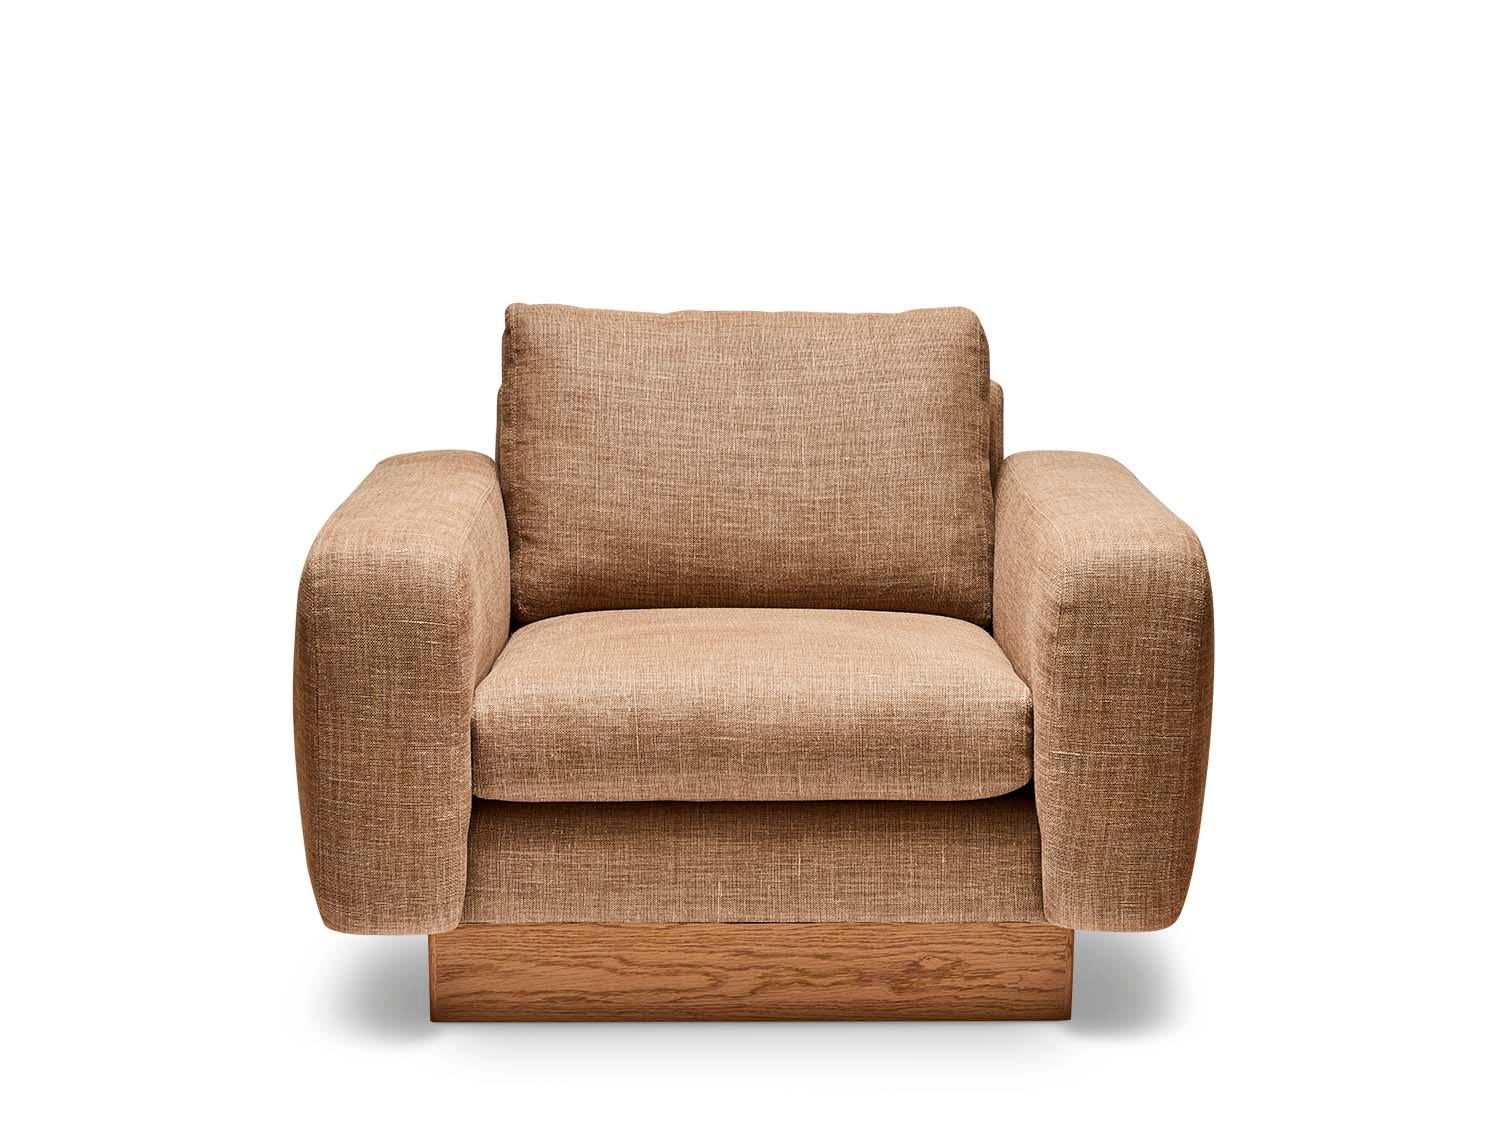 The Mesa lounge chair is a fully upholstered club chair that features a walnut or oak inset base.

The Lawson-Fenning Collection is designed and handmade in Los Angeles, California.
Message us to find out which finishes are currently in stock.